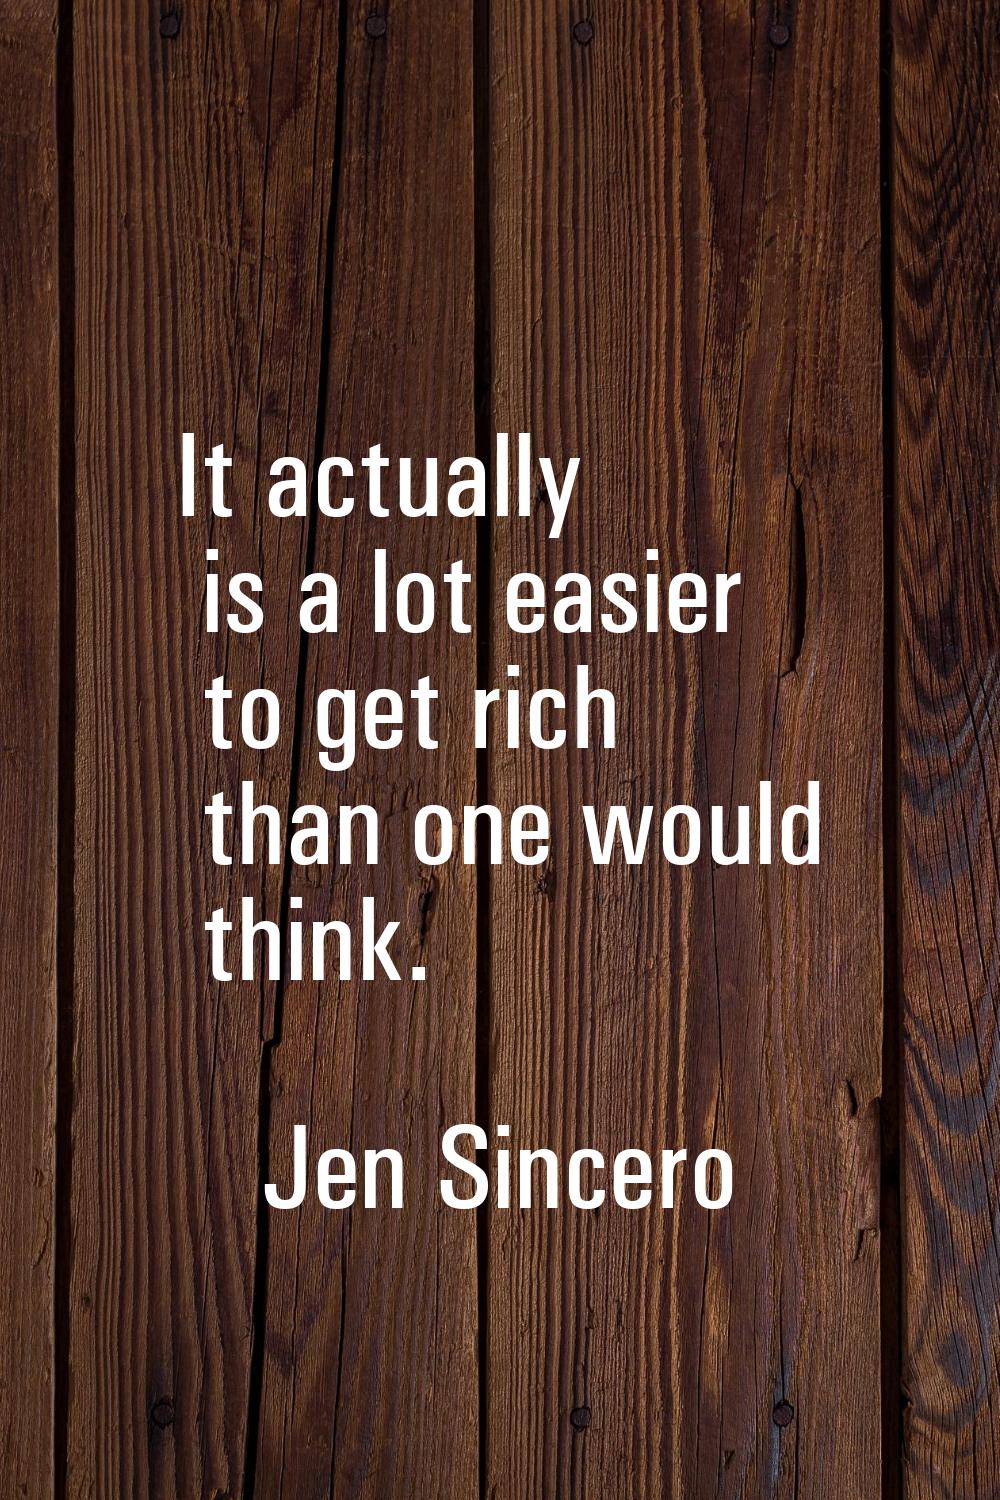 It actually is a lot easier to get rich than one would think.